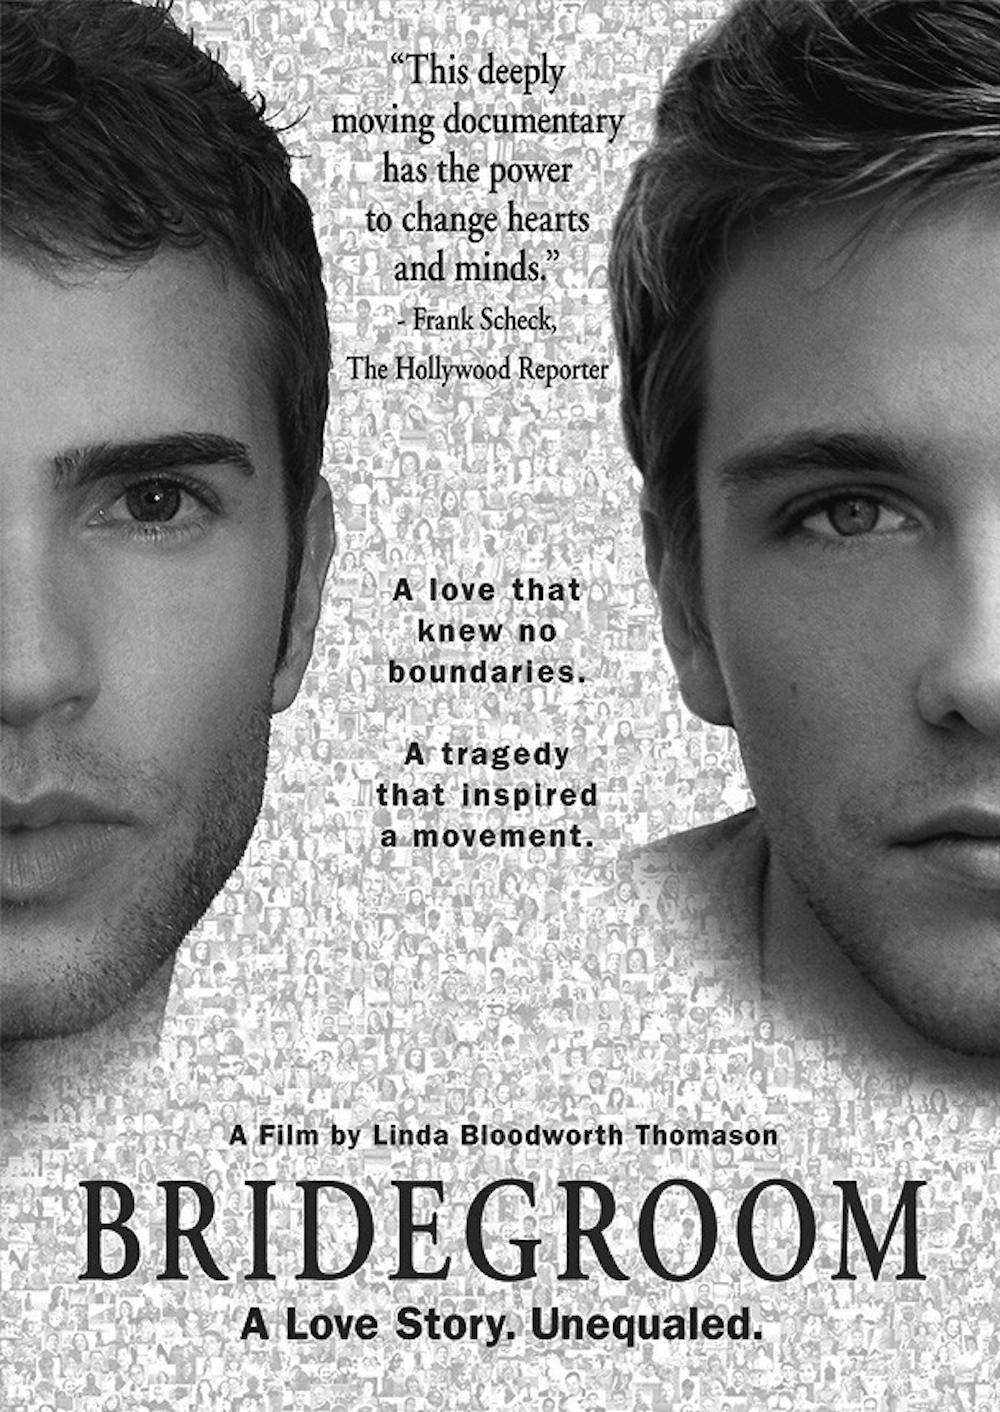 <p>Excellence in&nbsp;Leadership, the Office of Housing and Residence Life and Spectrum are hosting a showing of the documentary "Bridegroom" Nov. 16 at 7 p.m. in Pruis Hall. Shane Bitney Crone, the subject of the documentary, will speak after the showing and then participate in a meet&nbsp;and&nbsp;greet. <em>PHOTO PROVIDED BY THE OFFICE OF HOUSING AND RESIDENCE LIFE</em></p>